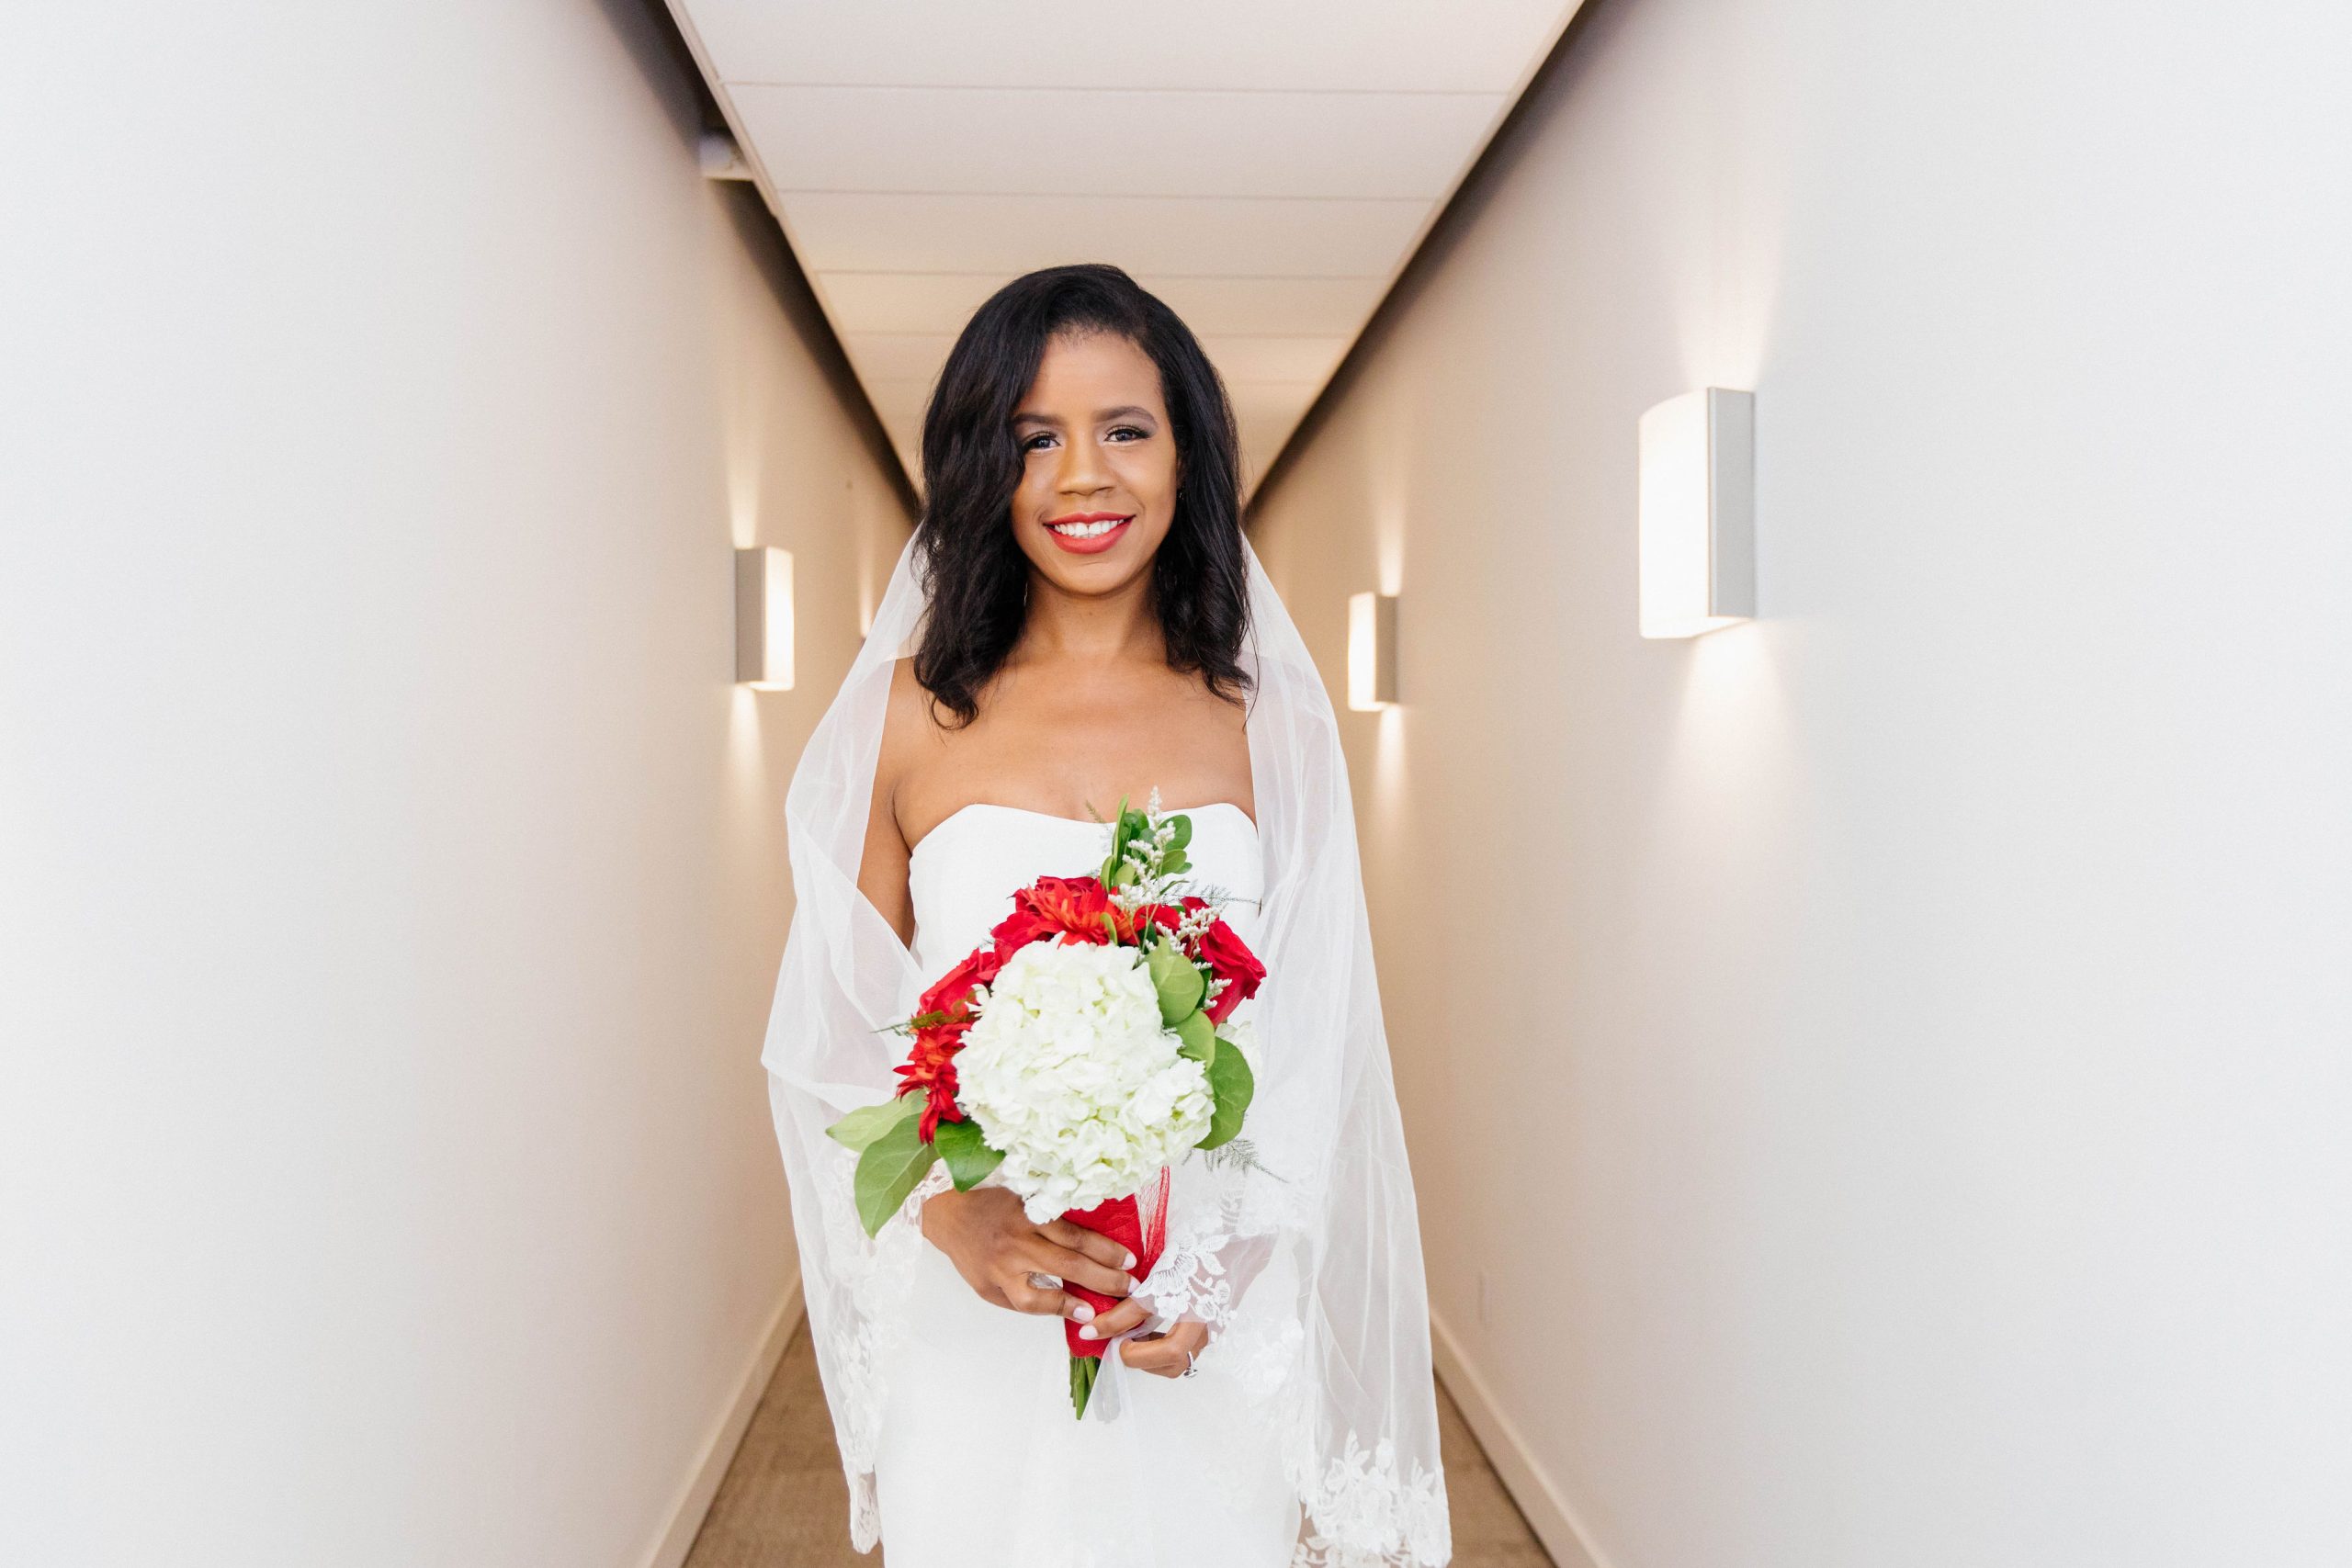 A woman in white dress holding a bouquet of flowers.